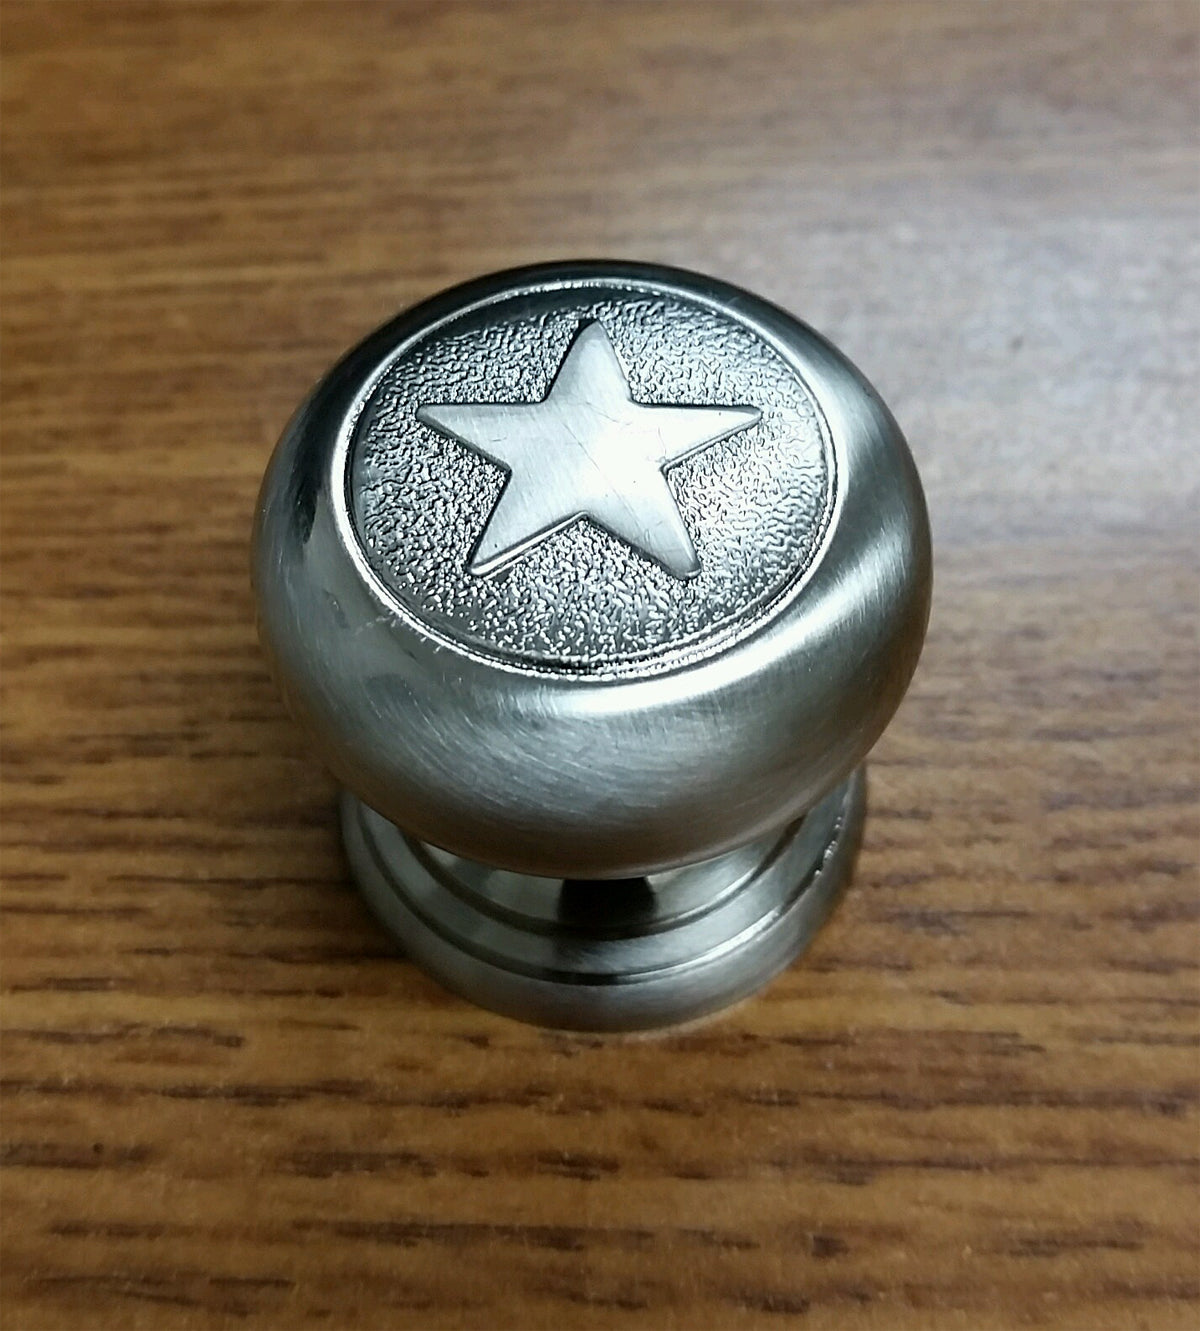 A top-down view of a star-shaped knob, used as a decorative drawer or cabinet pull, displayed on a white background.